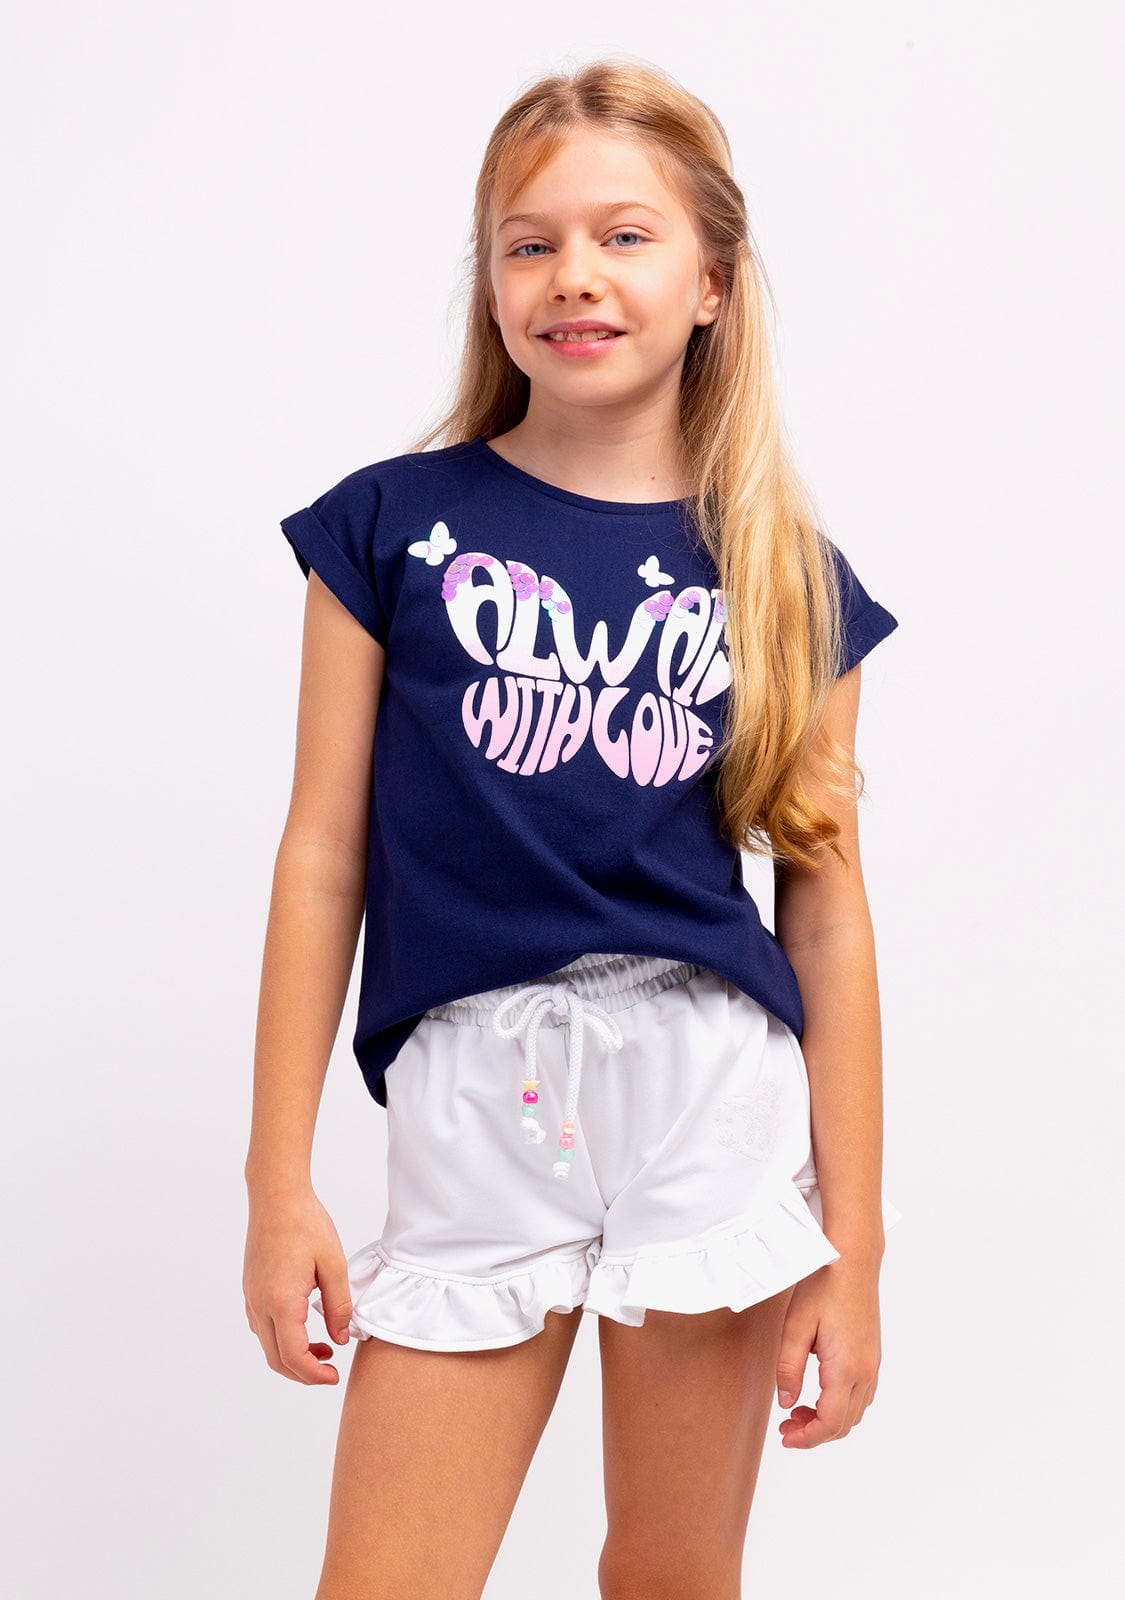 CONGUITOS TEXTIL Clothing Girl´s Navy Print Butterfly T-shirt